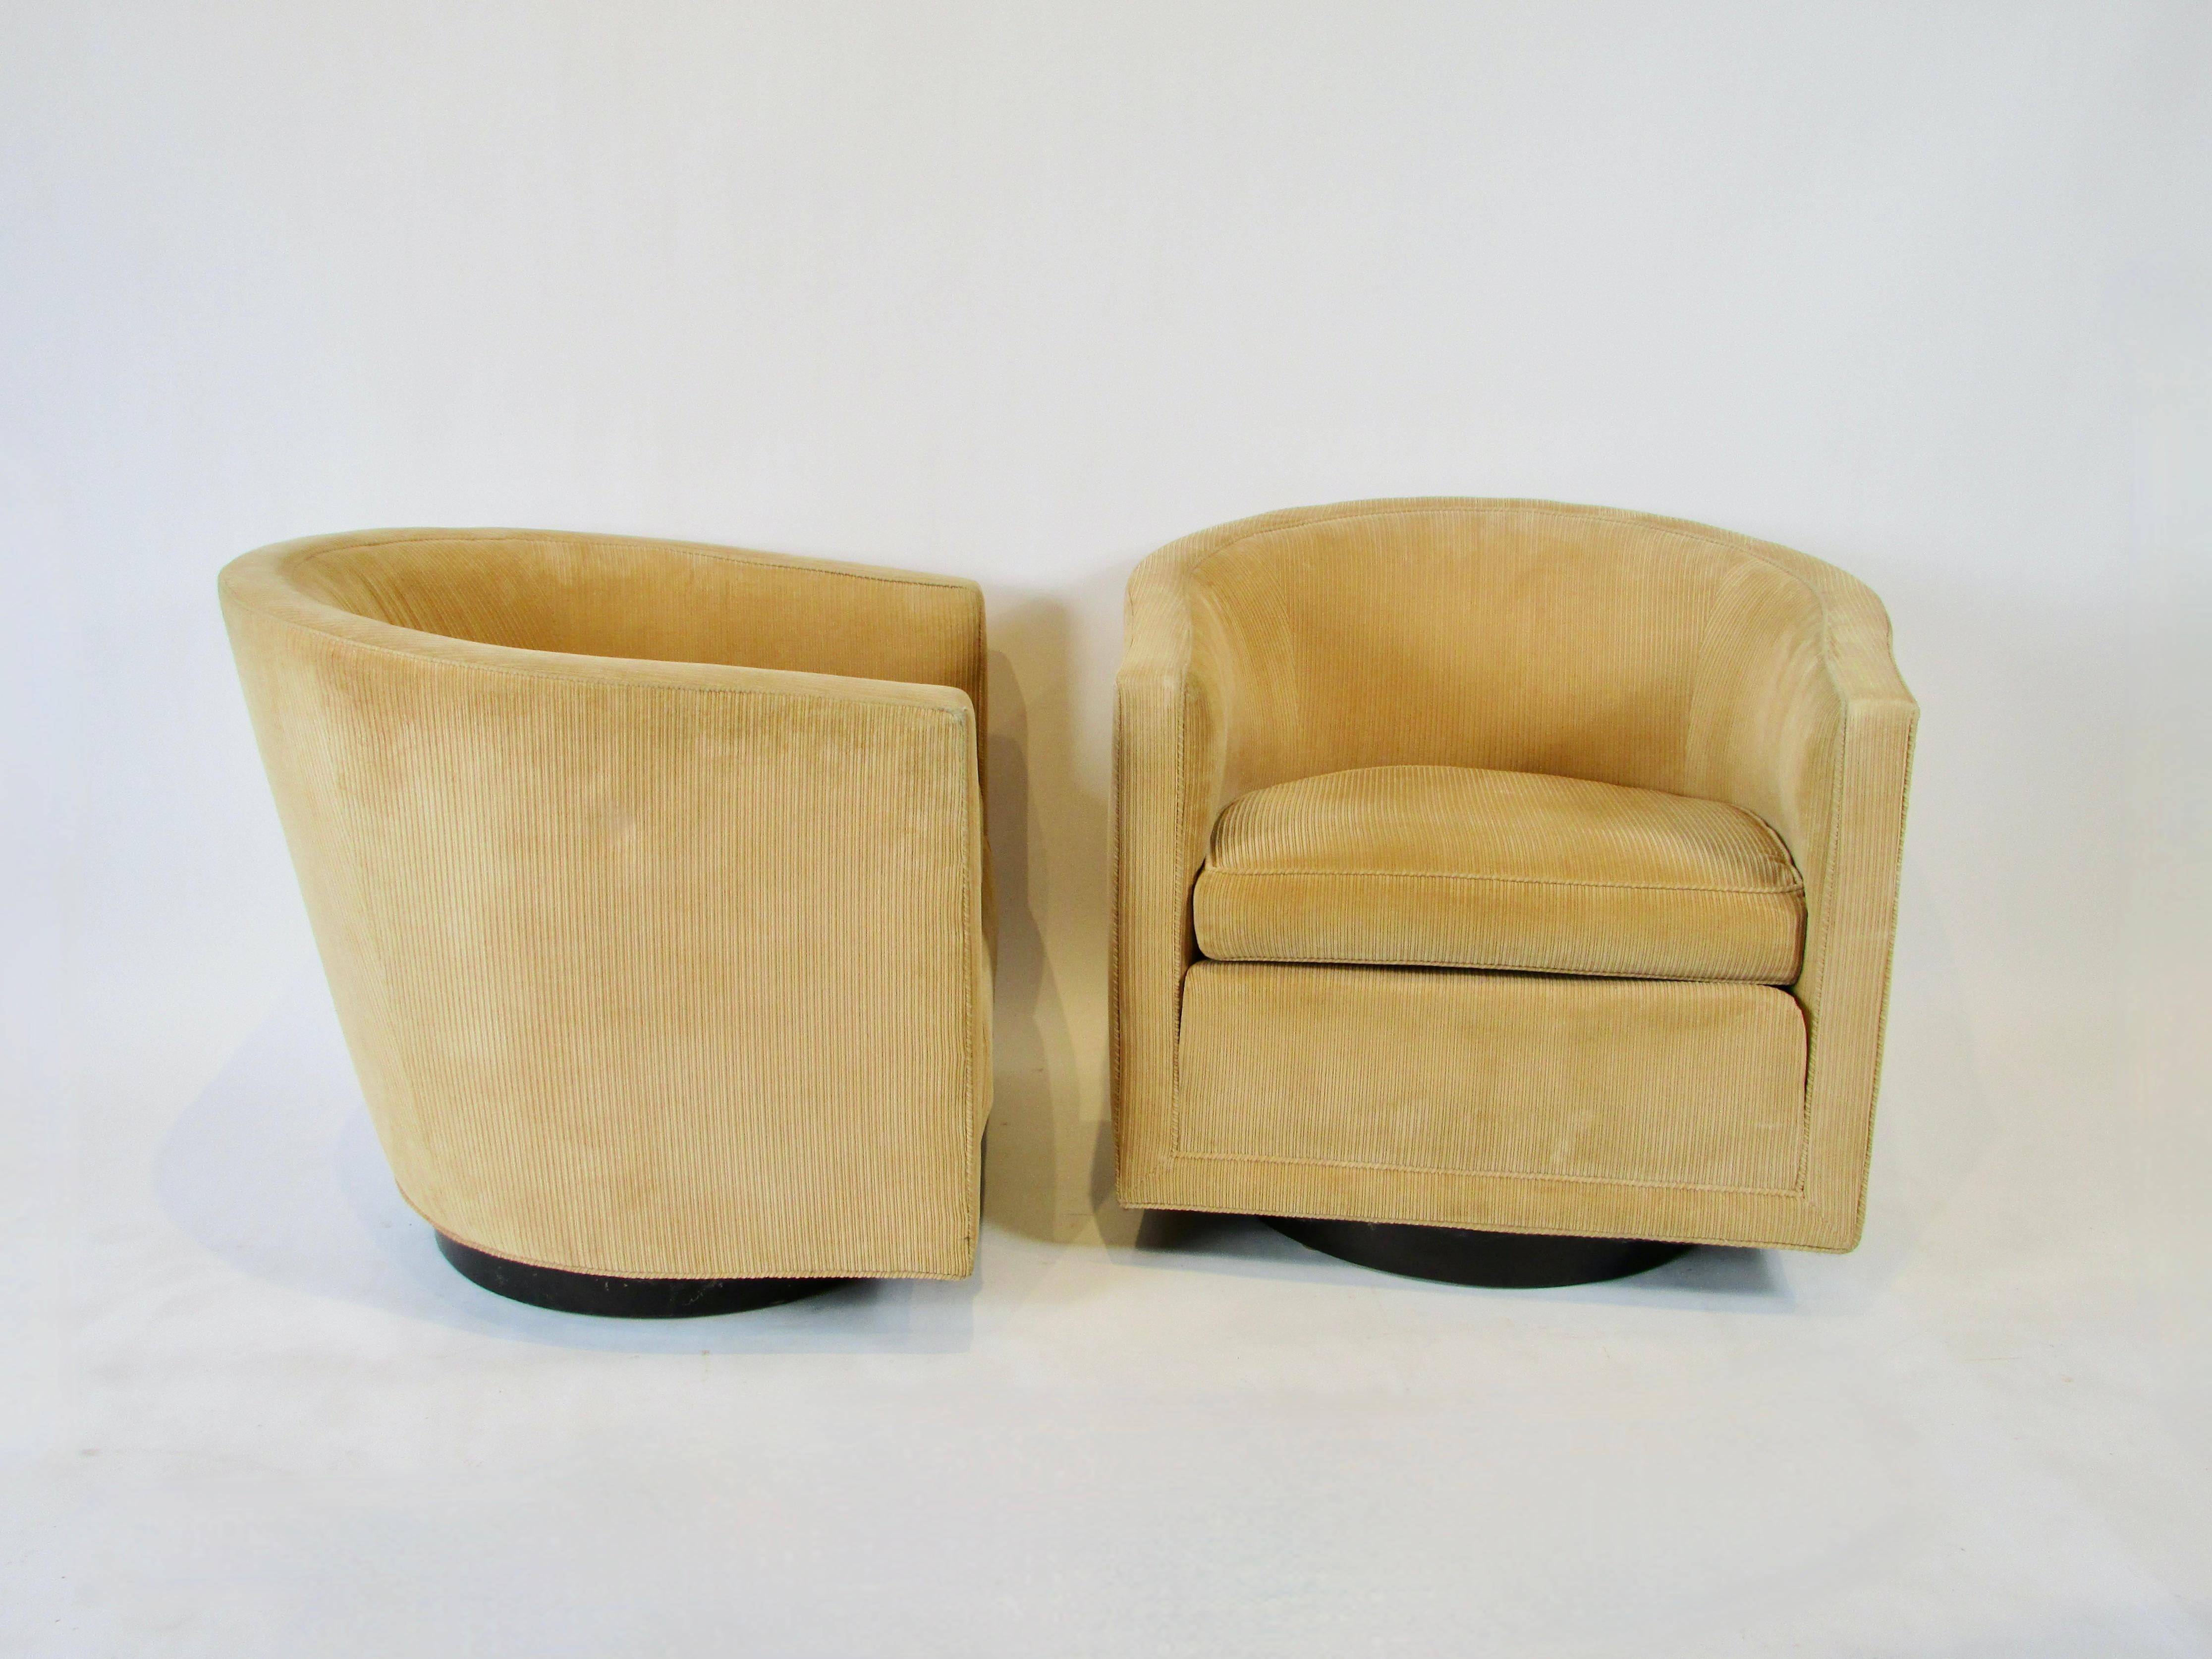 Hand-Crafted Pair of Edward Wormley for Dunbar Swivel Barrel Chairs in Clean Original Fabric